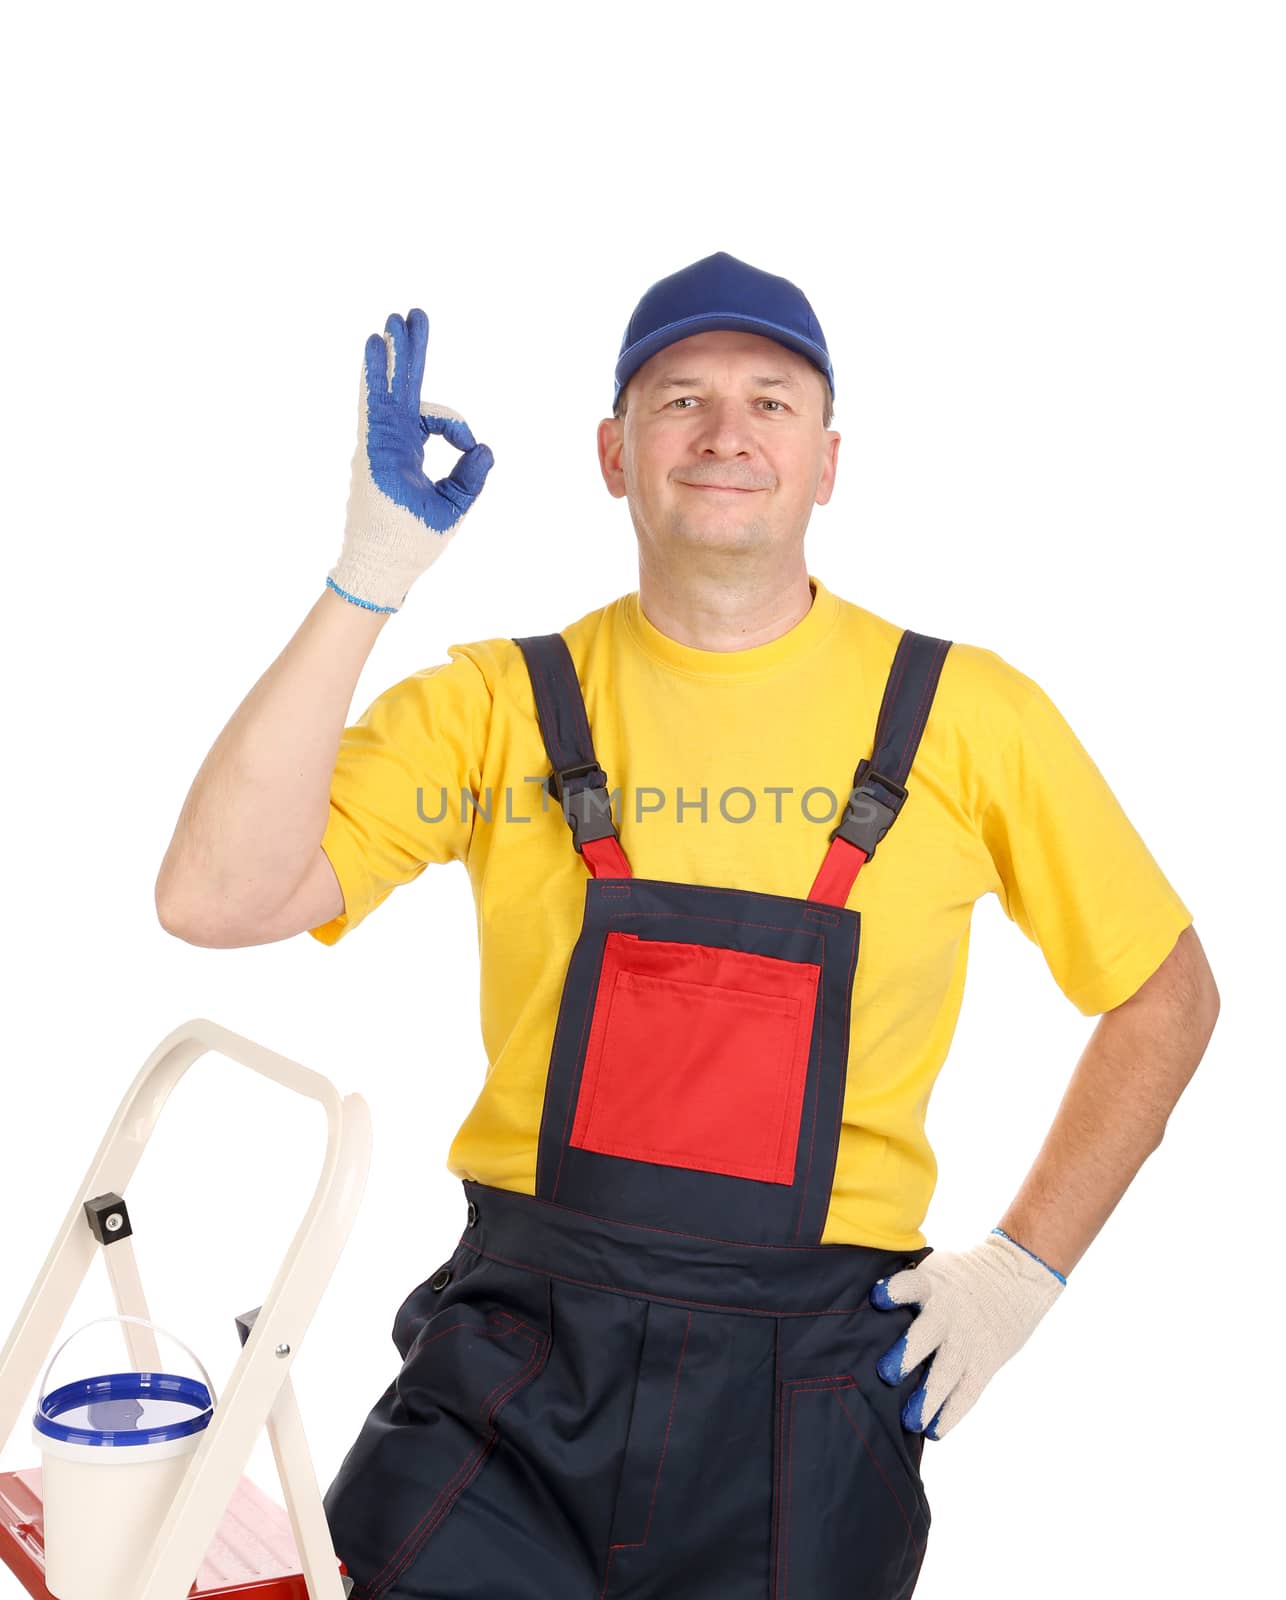 Worker on ladder showing sign okey. Isolated on a white background.